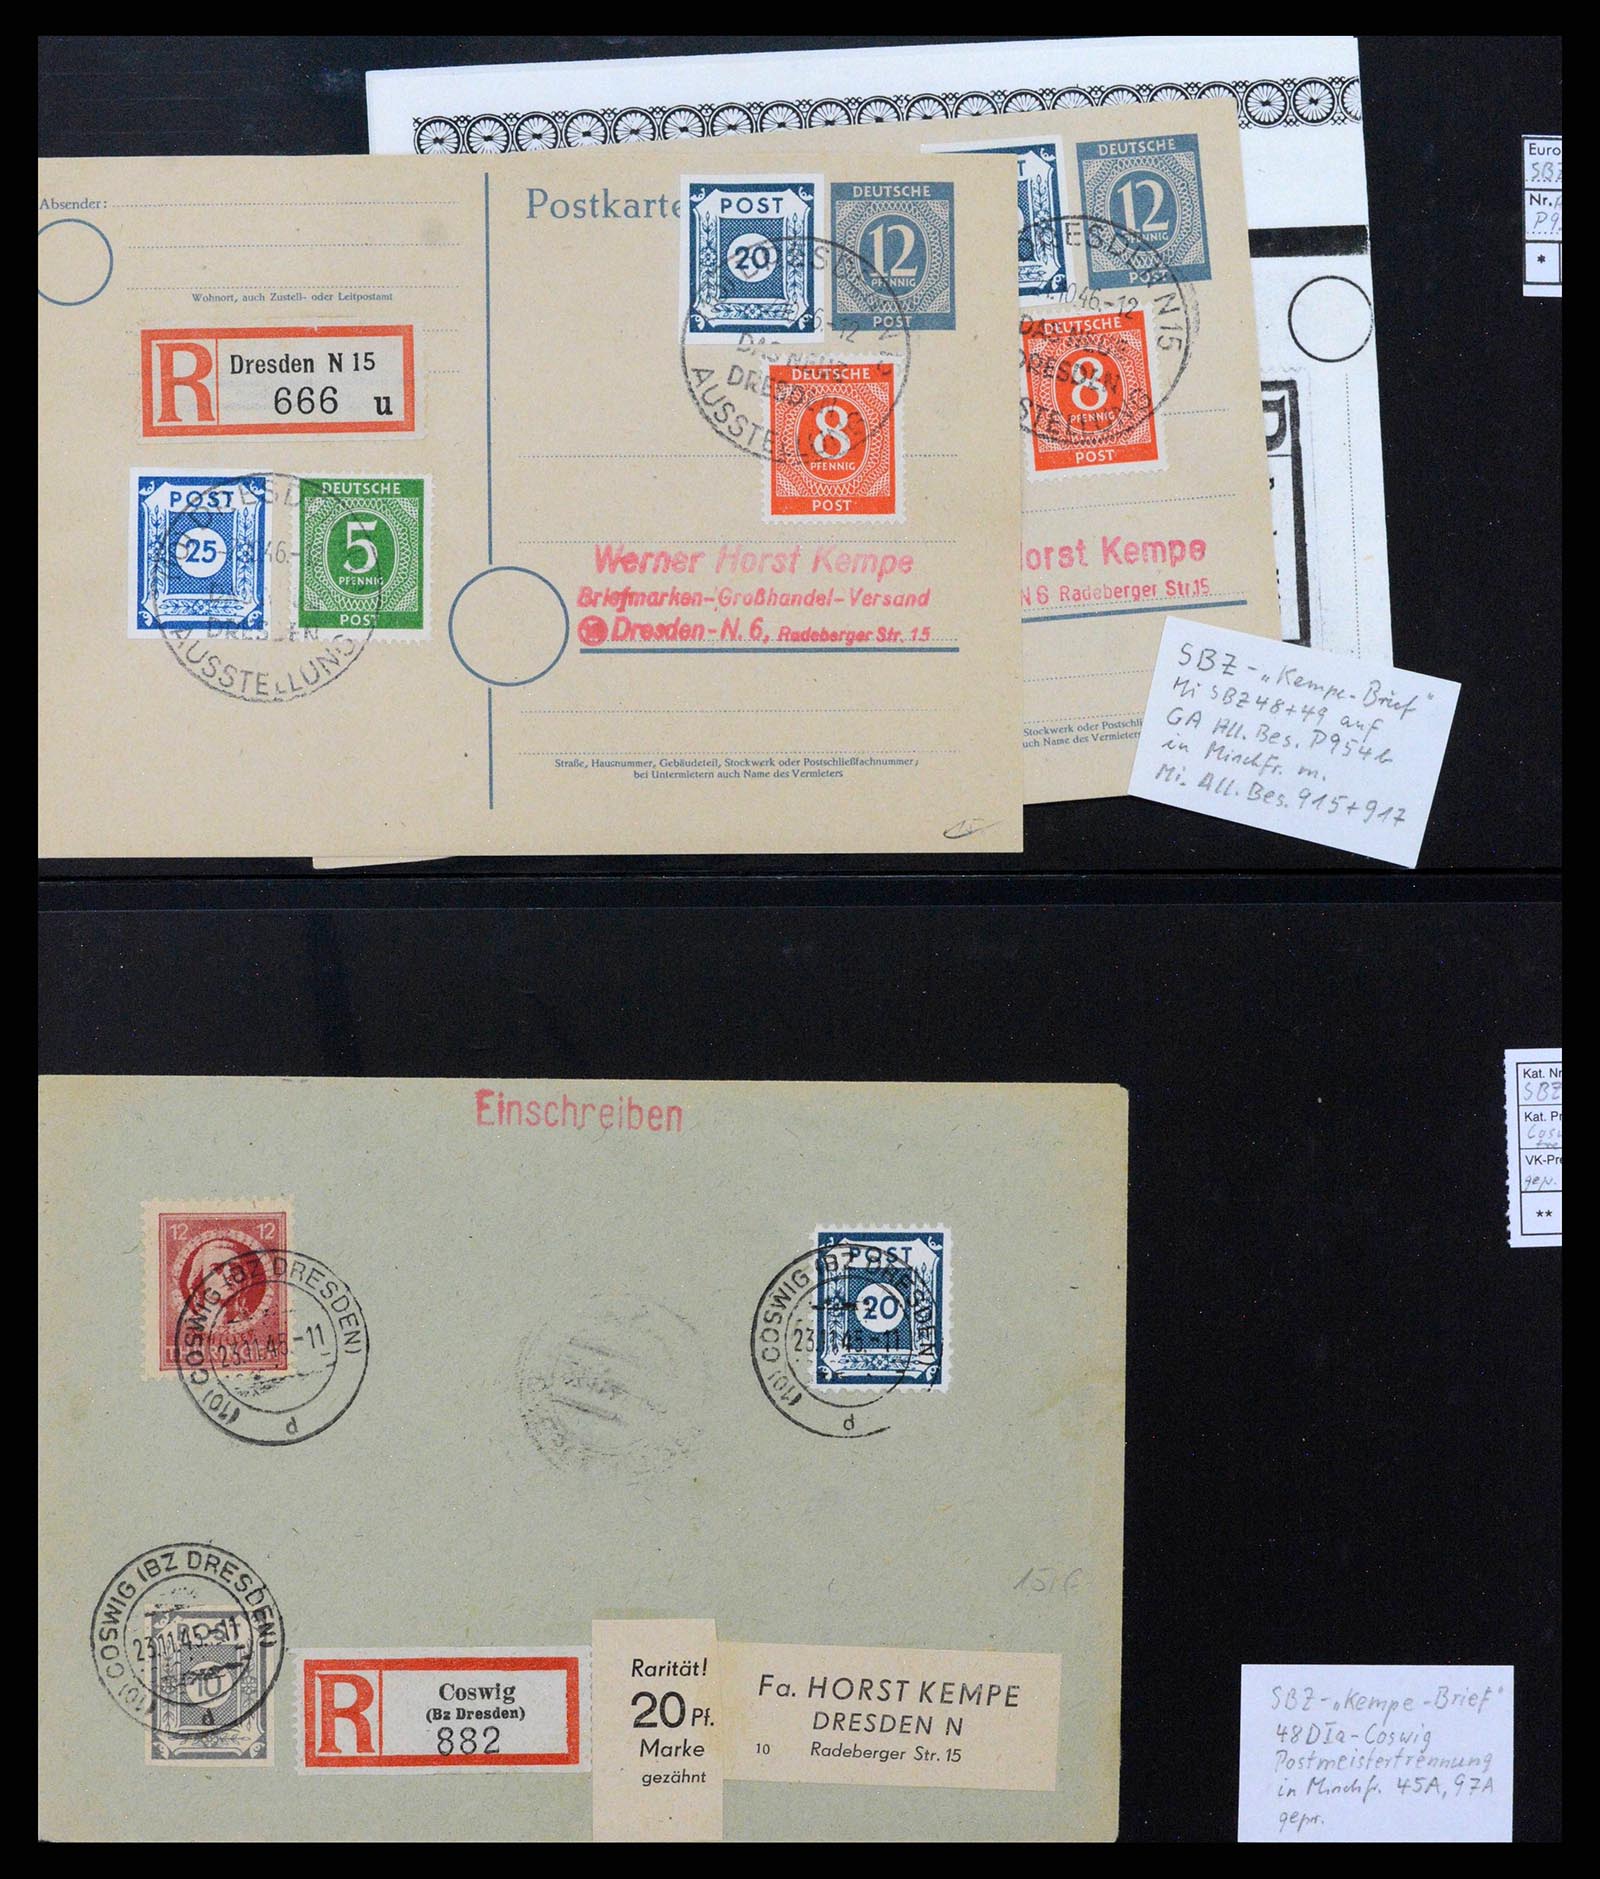 38890 0010 - Stamp collection 38890 Germany sovjet zone 1945-1949.